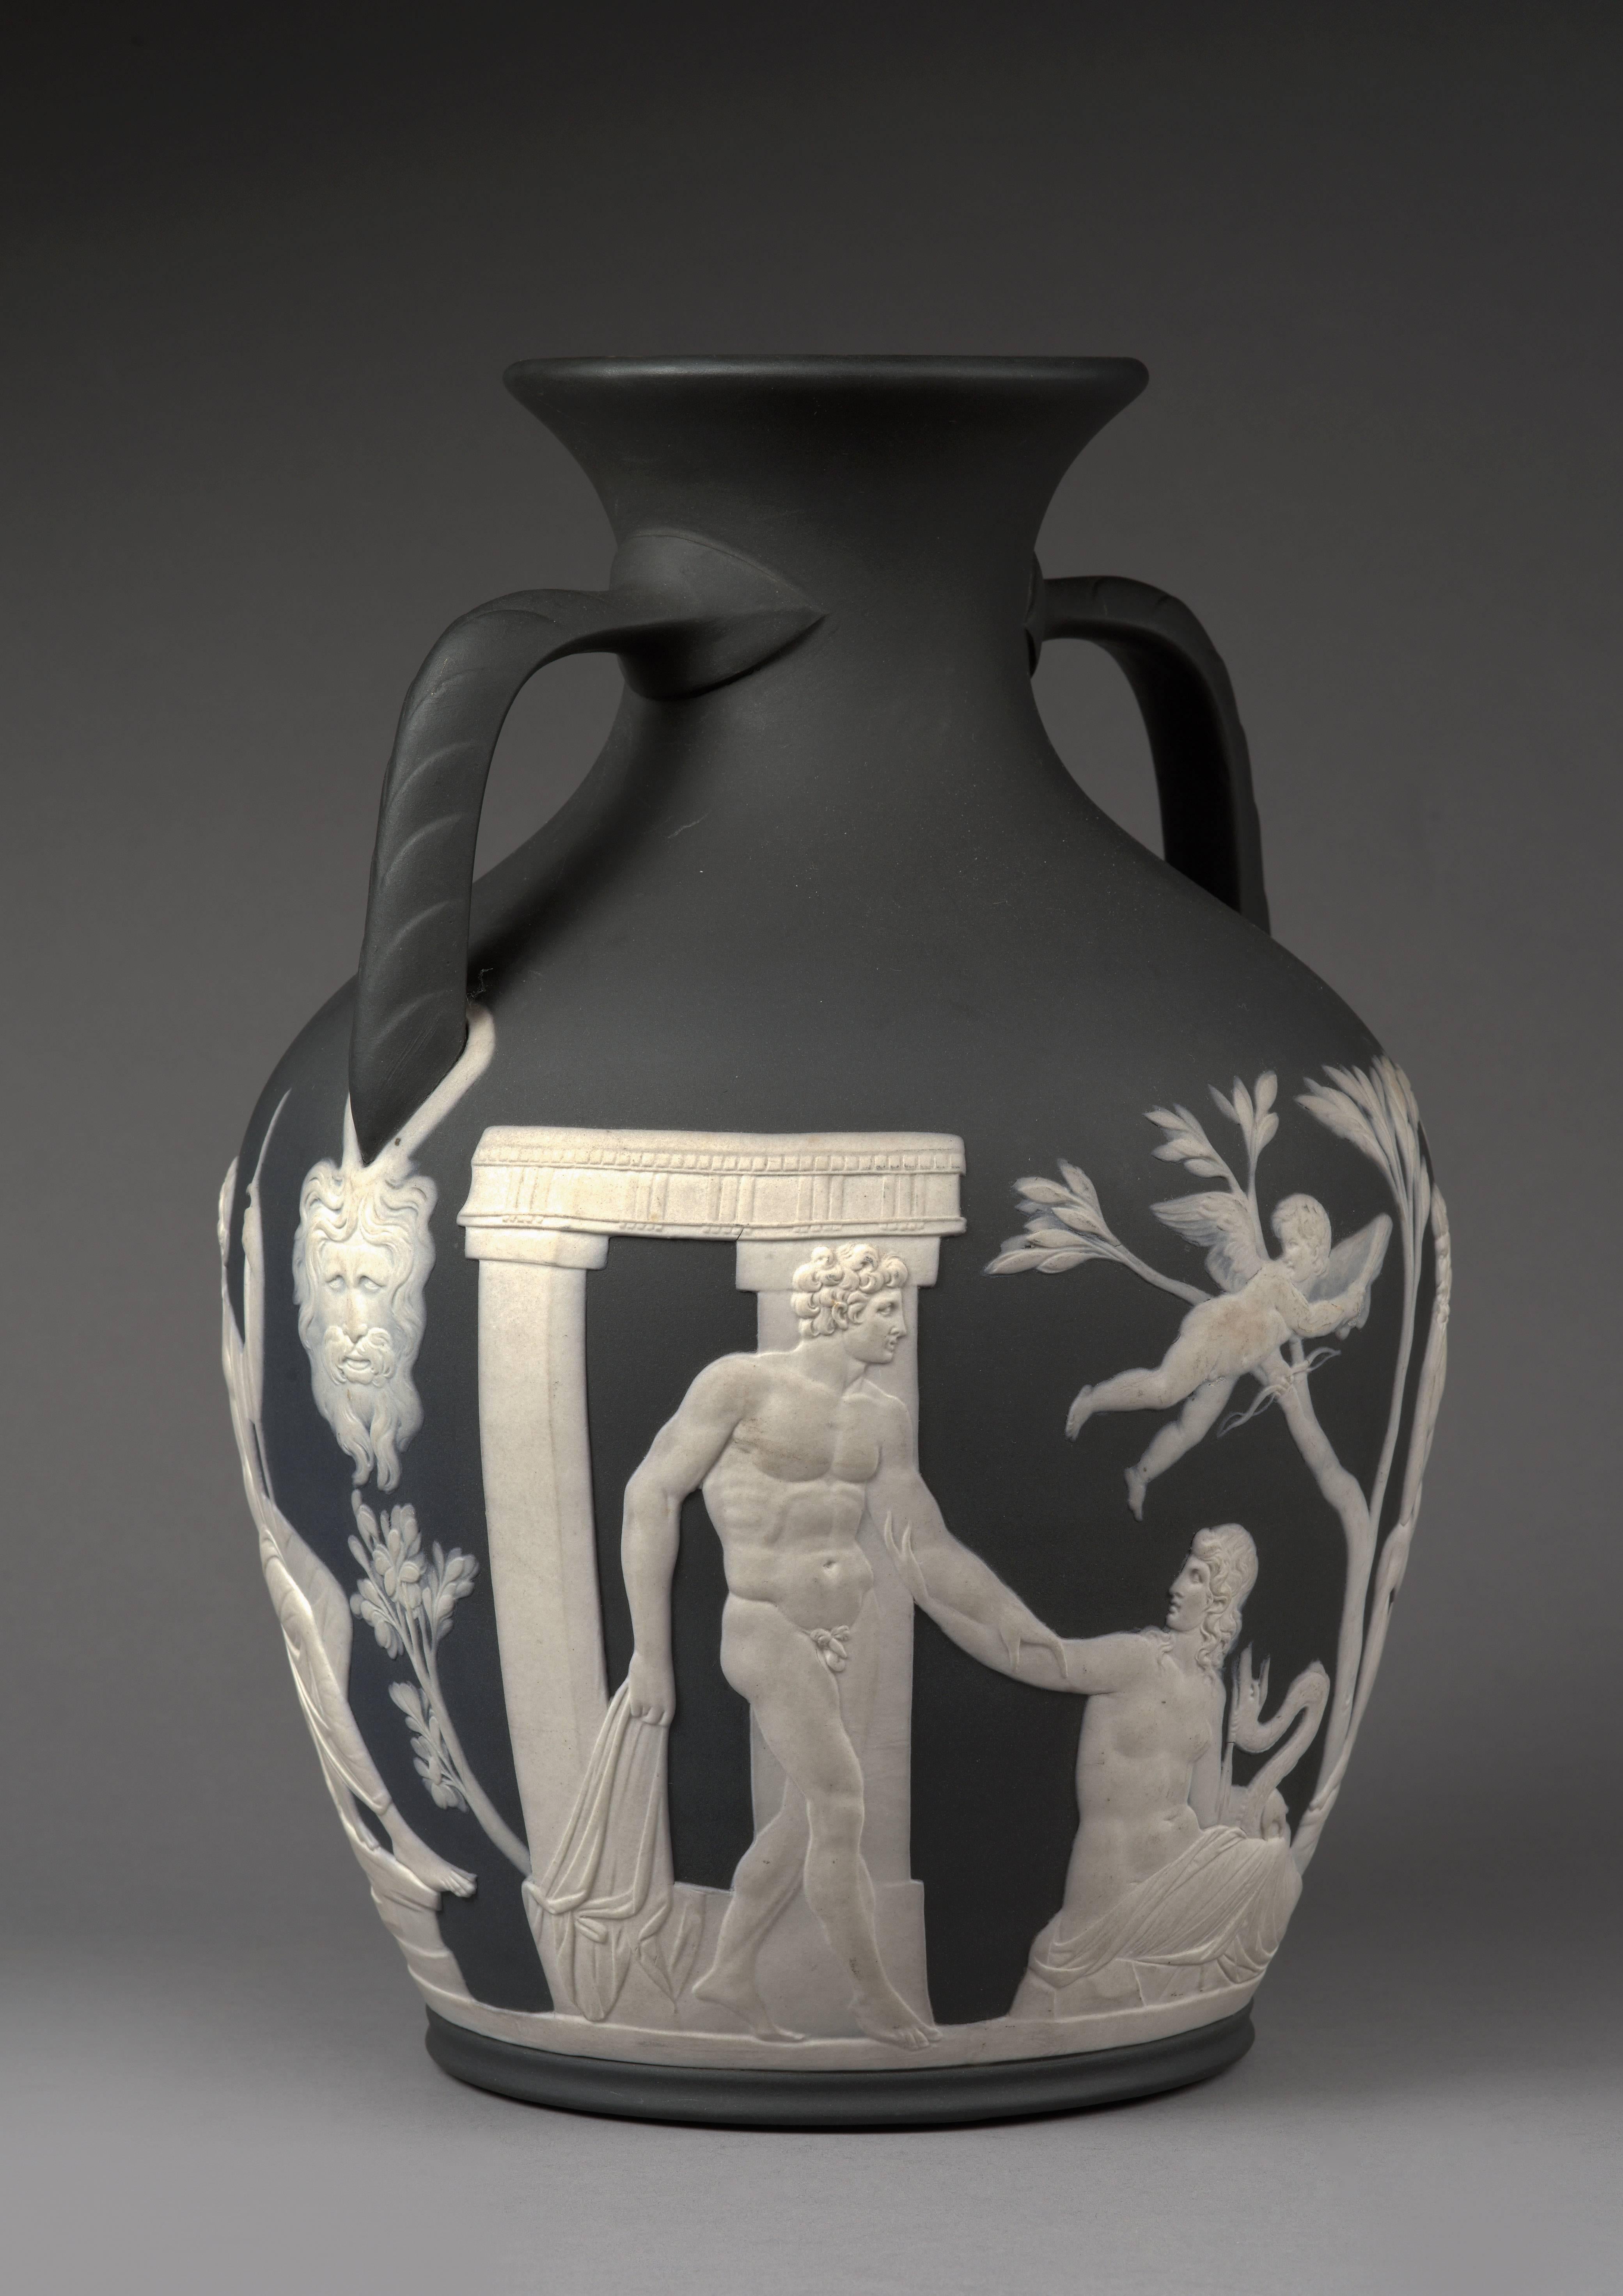 The famous Portland vase by Wedgwood. Signed and dated with horizontal I which indicates the year of manufacturing 1880. Named after the Duchess of Portland, Margaret Cavendish Bentinck (1715-1785), one of the owners of the original vessel. Black